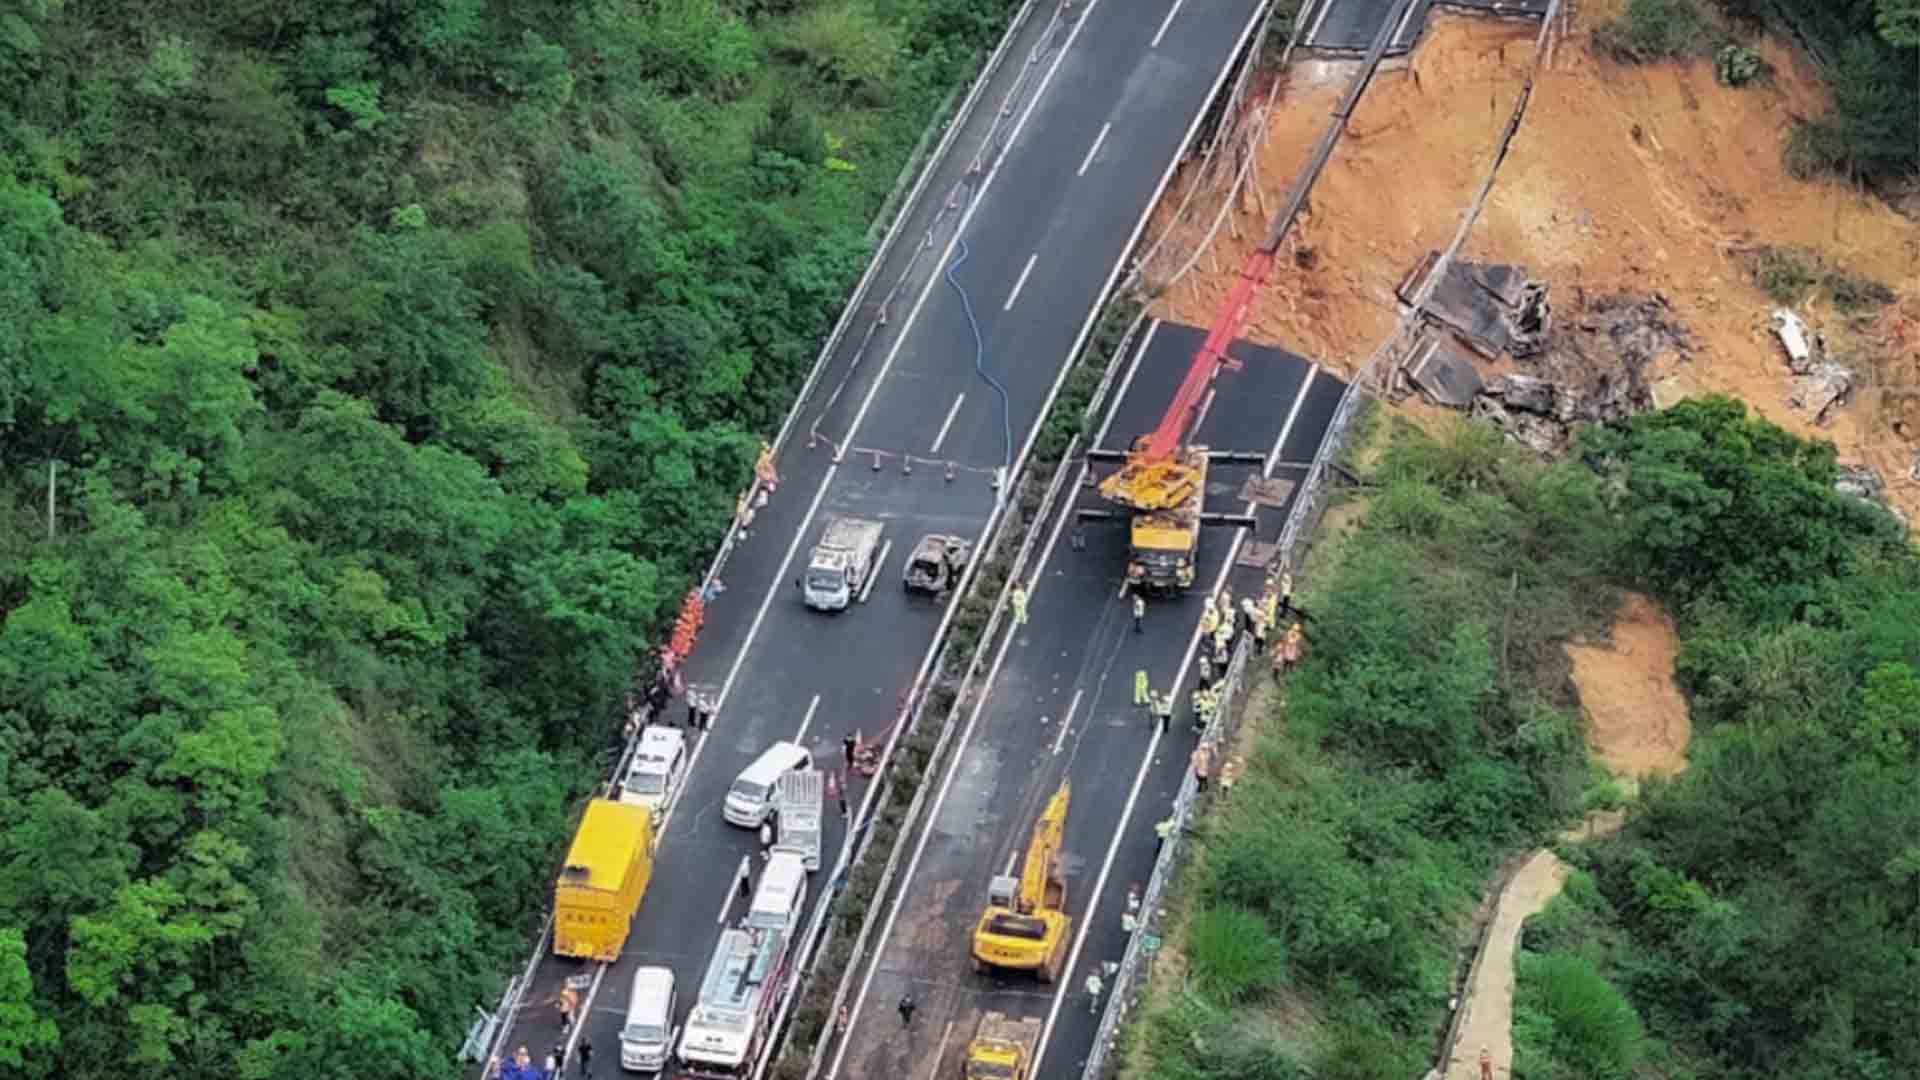 Tragic highway collapse in China leaves 24 dead, 30 injured